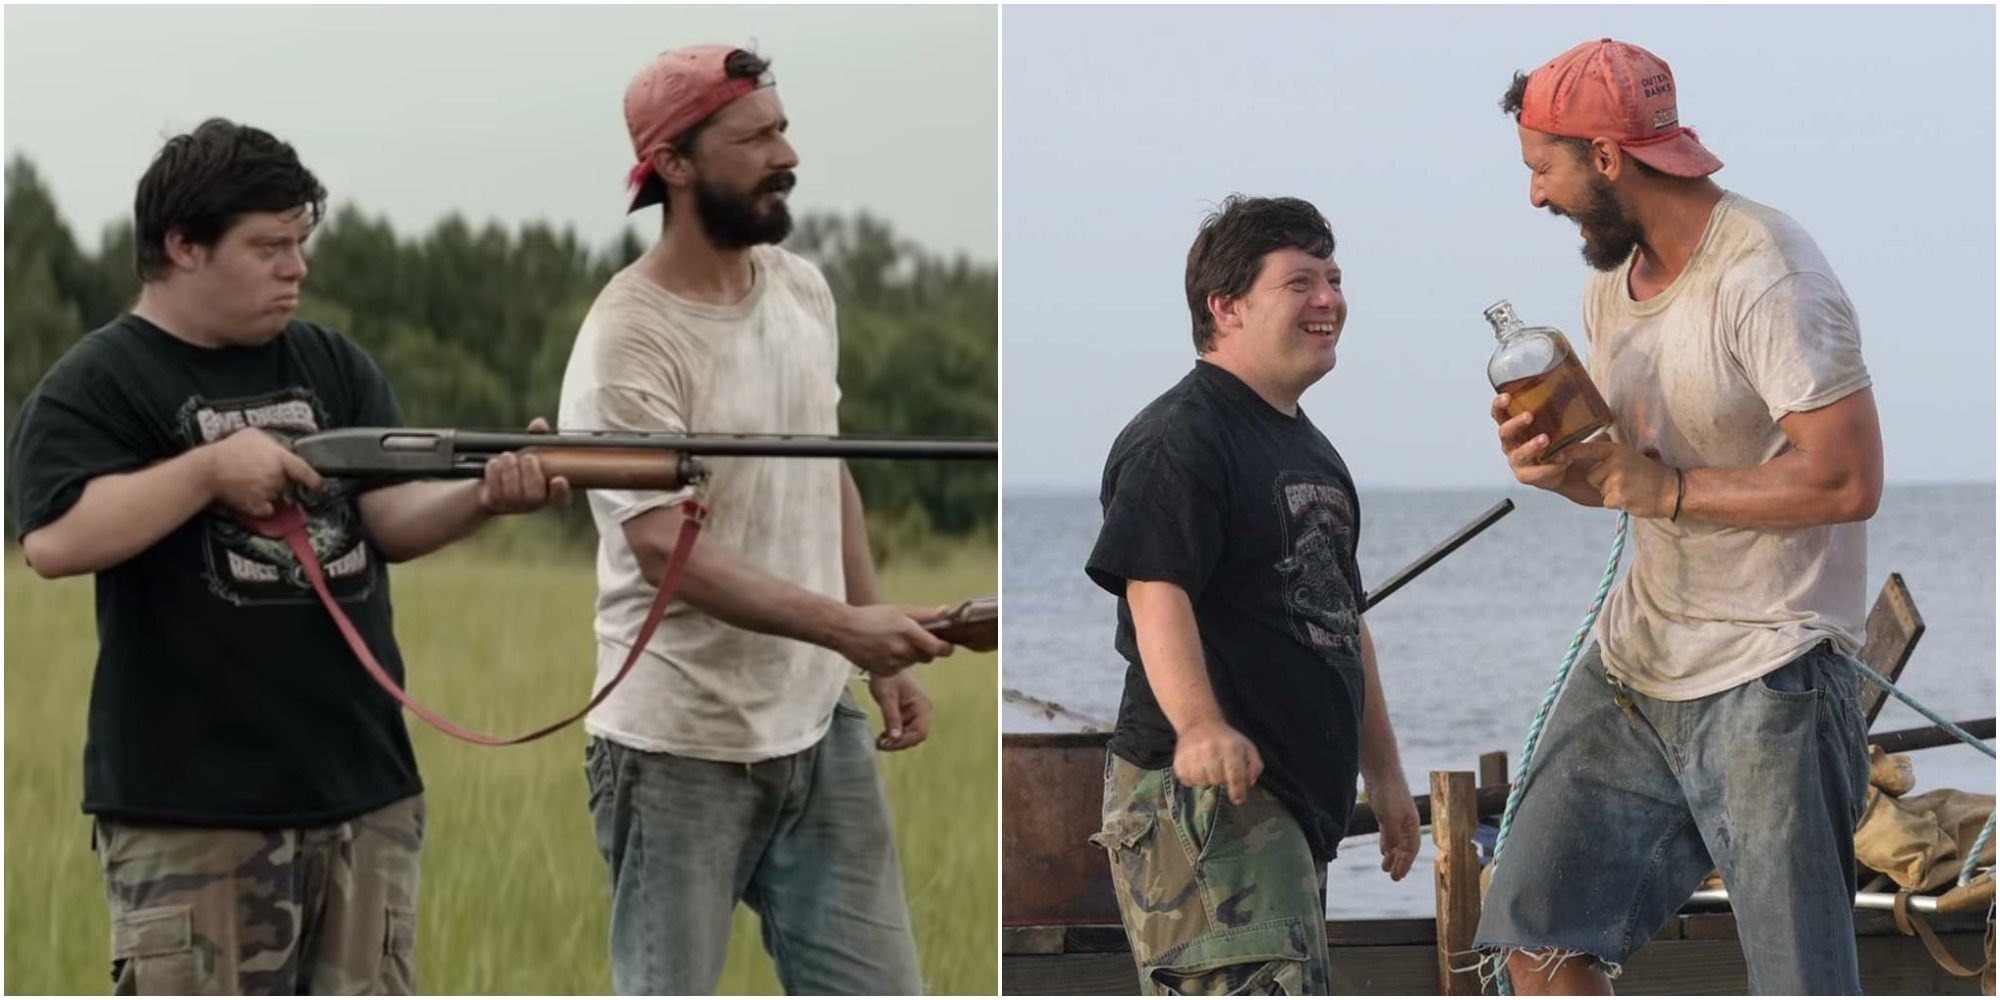 A split image of two stills from The Peanut Butter Falcon